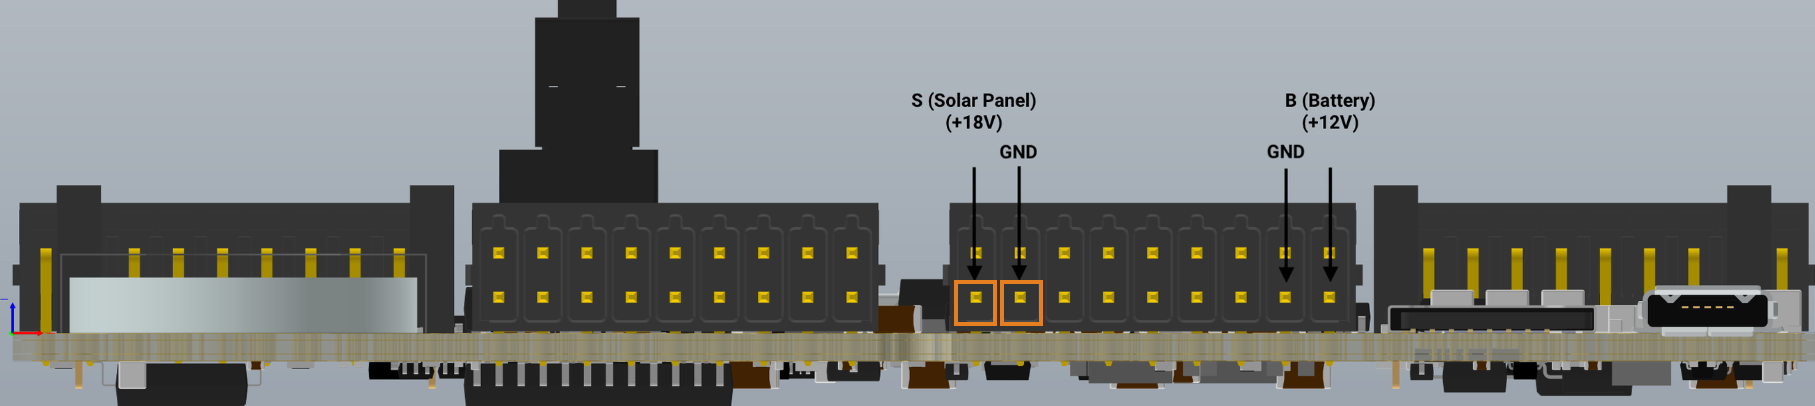 Schematic with S (Solar) and GND (Ground) pins highlighted